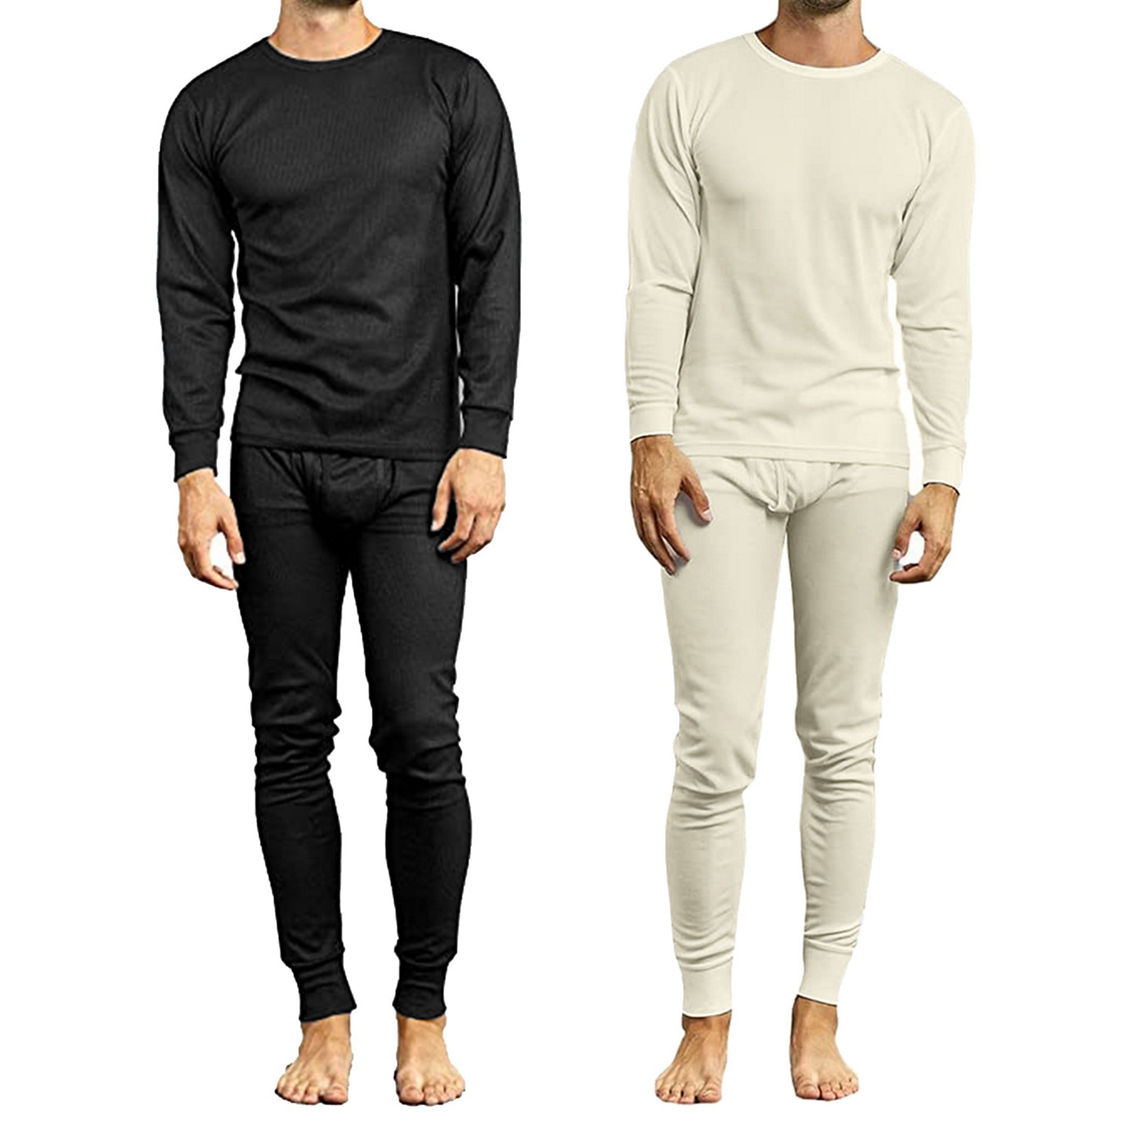 Galaxy By Harvic Men's 4-piece Thermal Top & Bottom Sets (2-tops & 2 ...